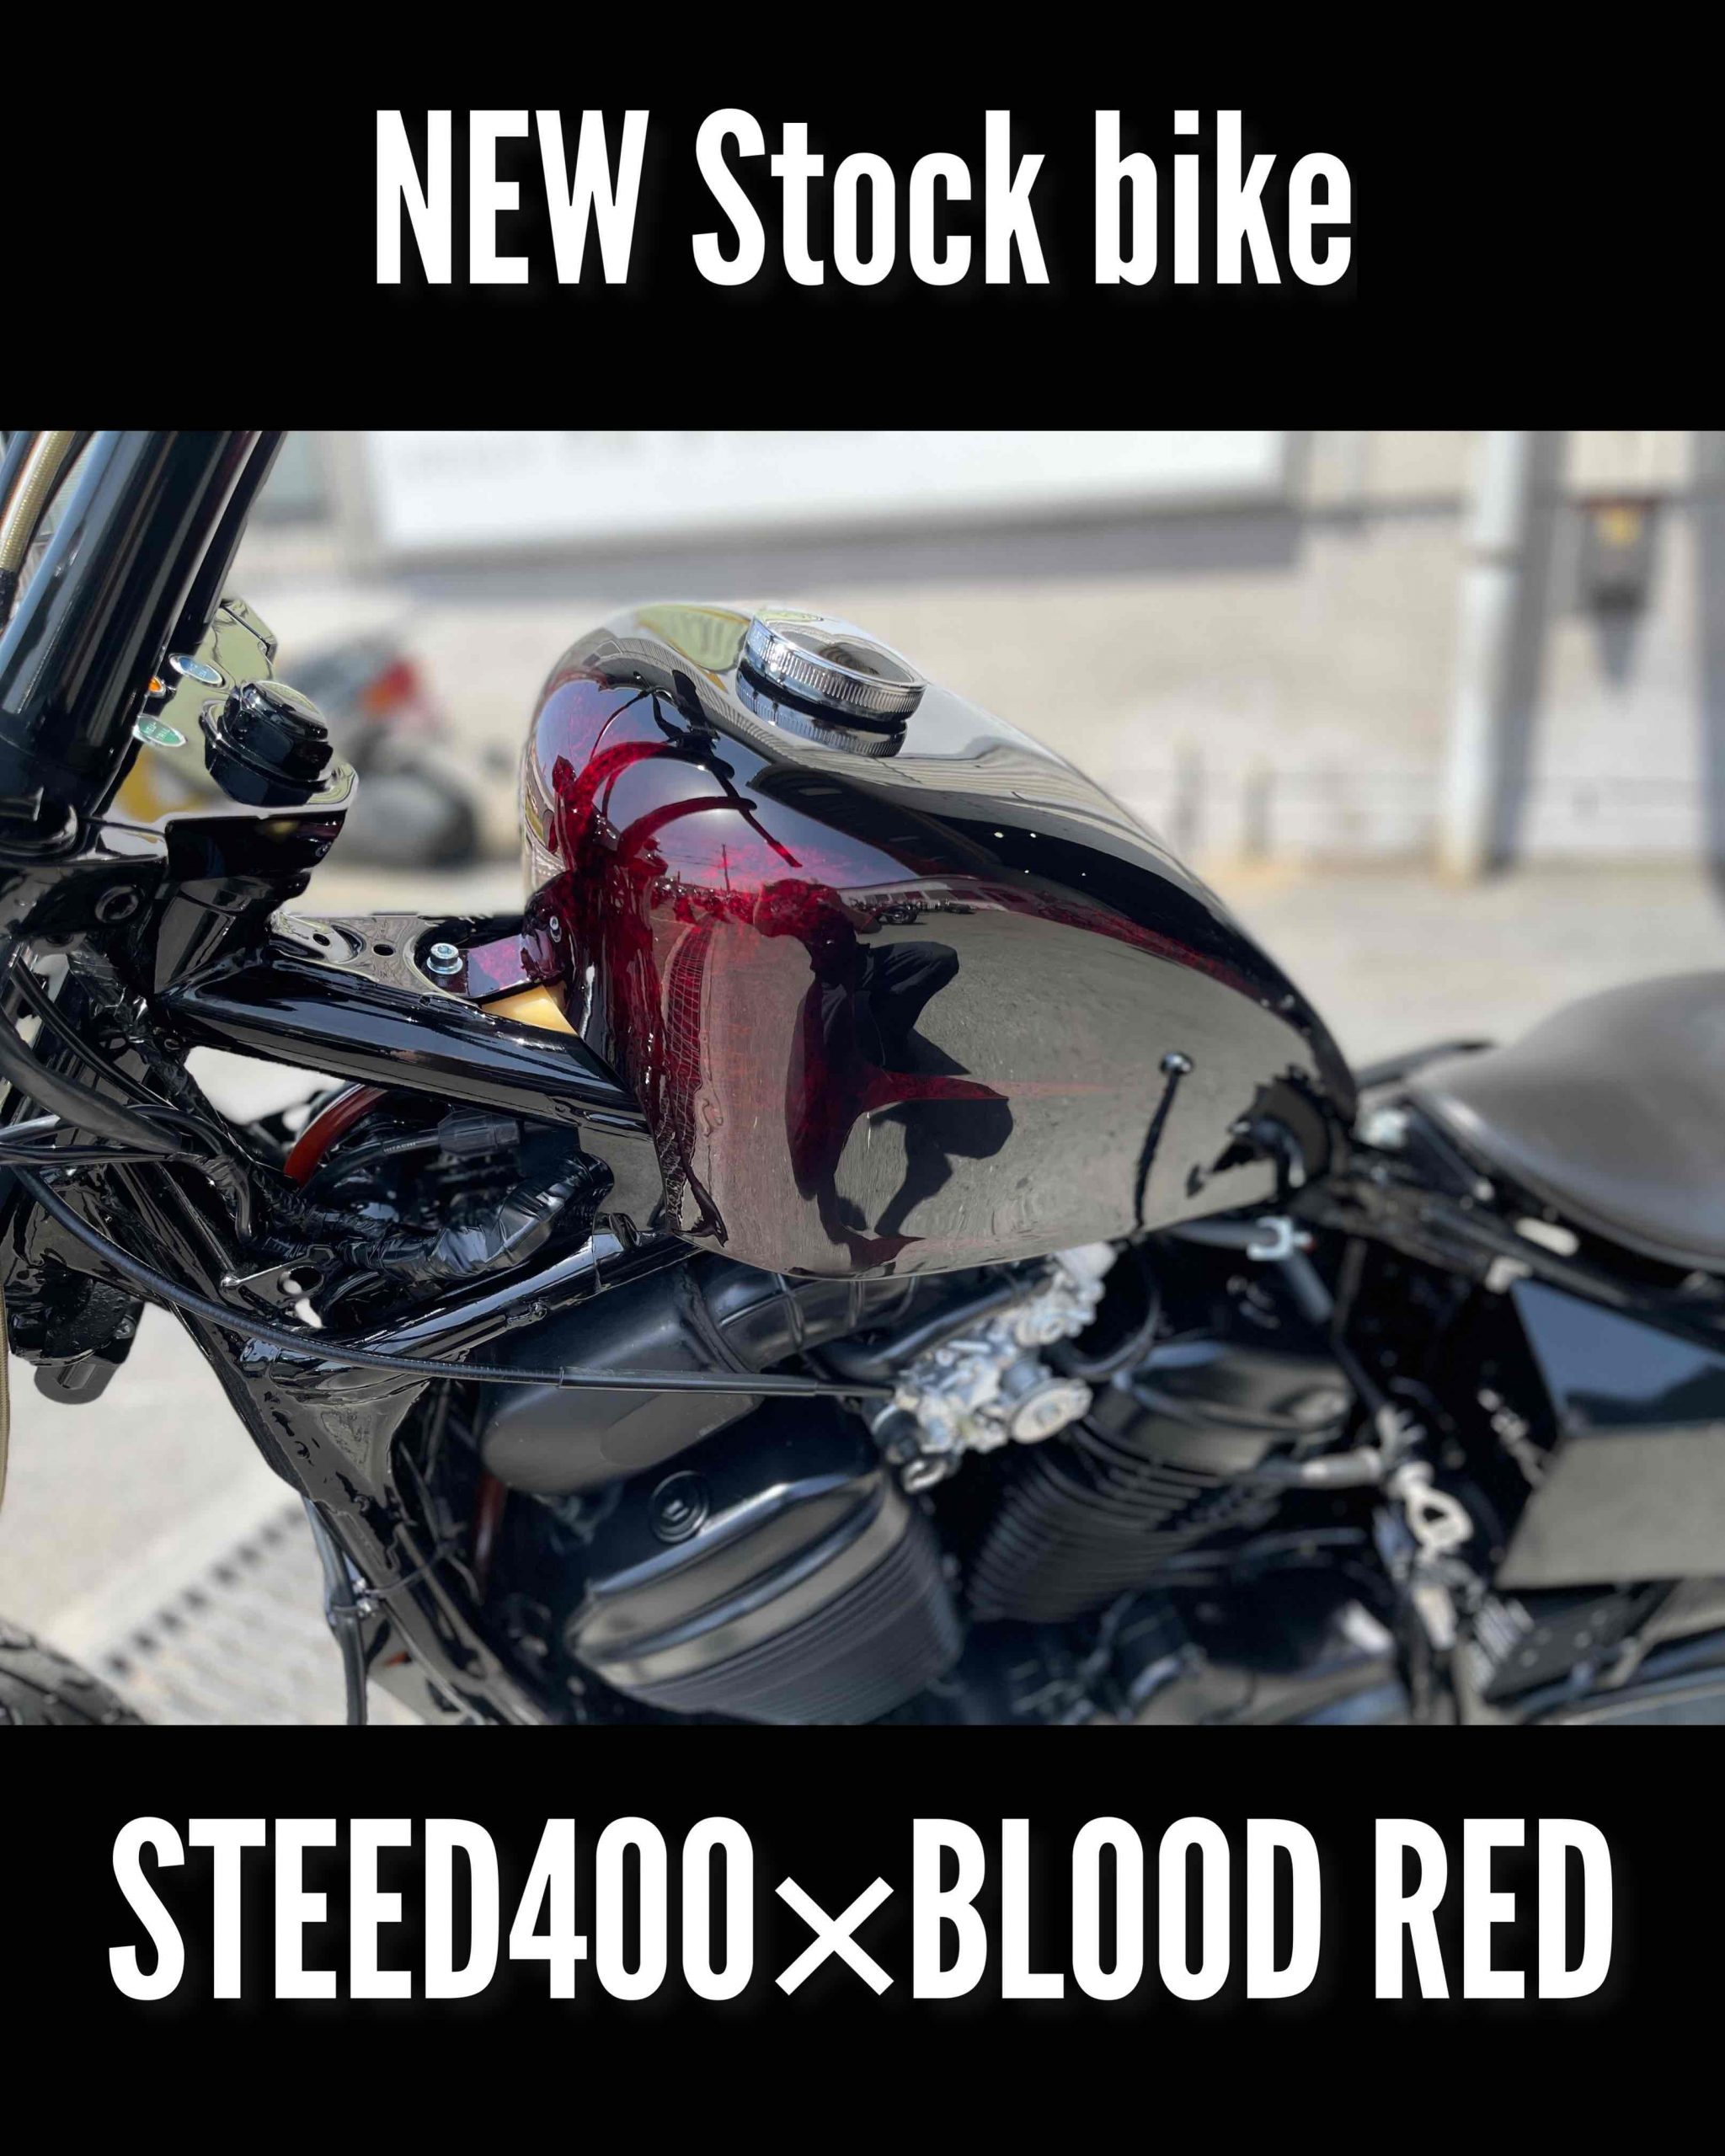 STEED400 FRISCO STYLE✖️BLOOD RED 在庫車両完成致しました☆